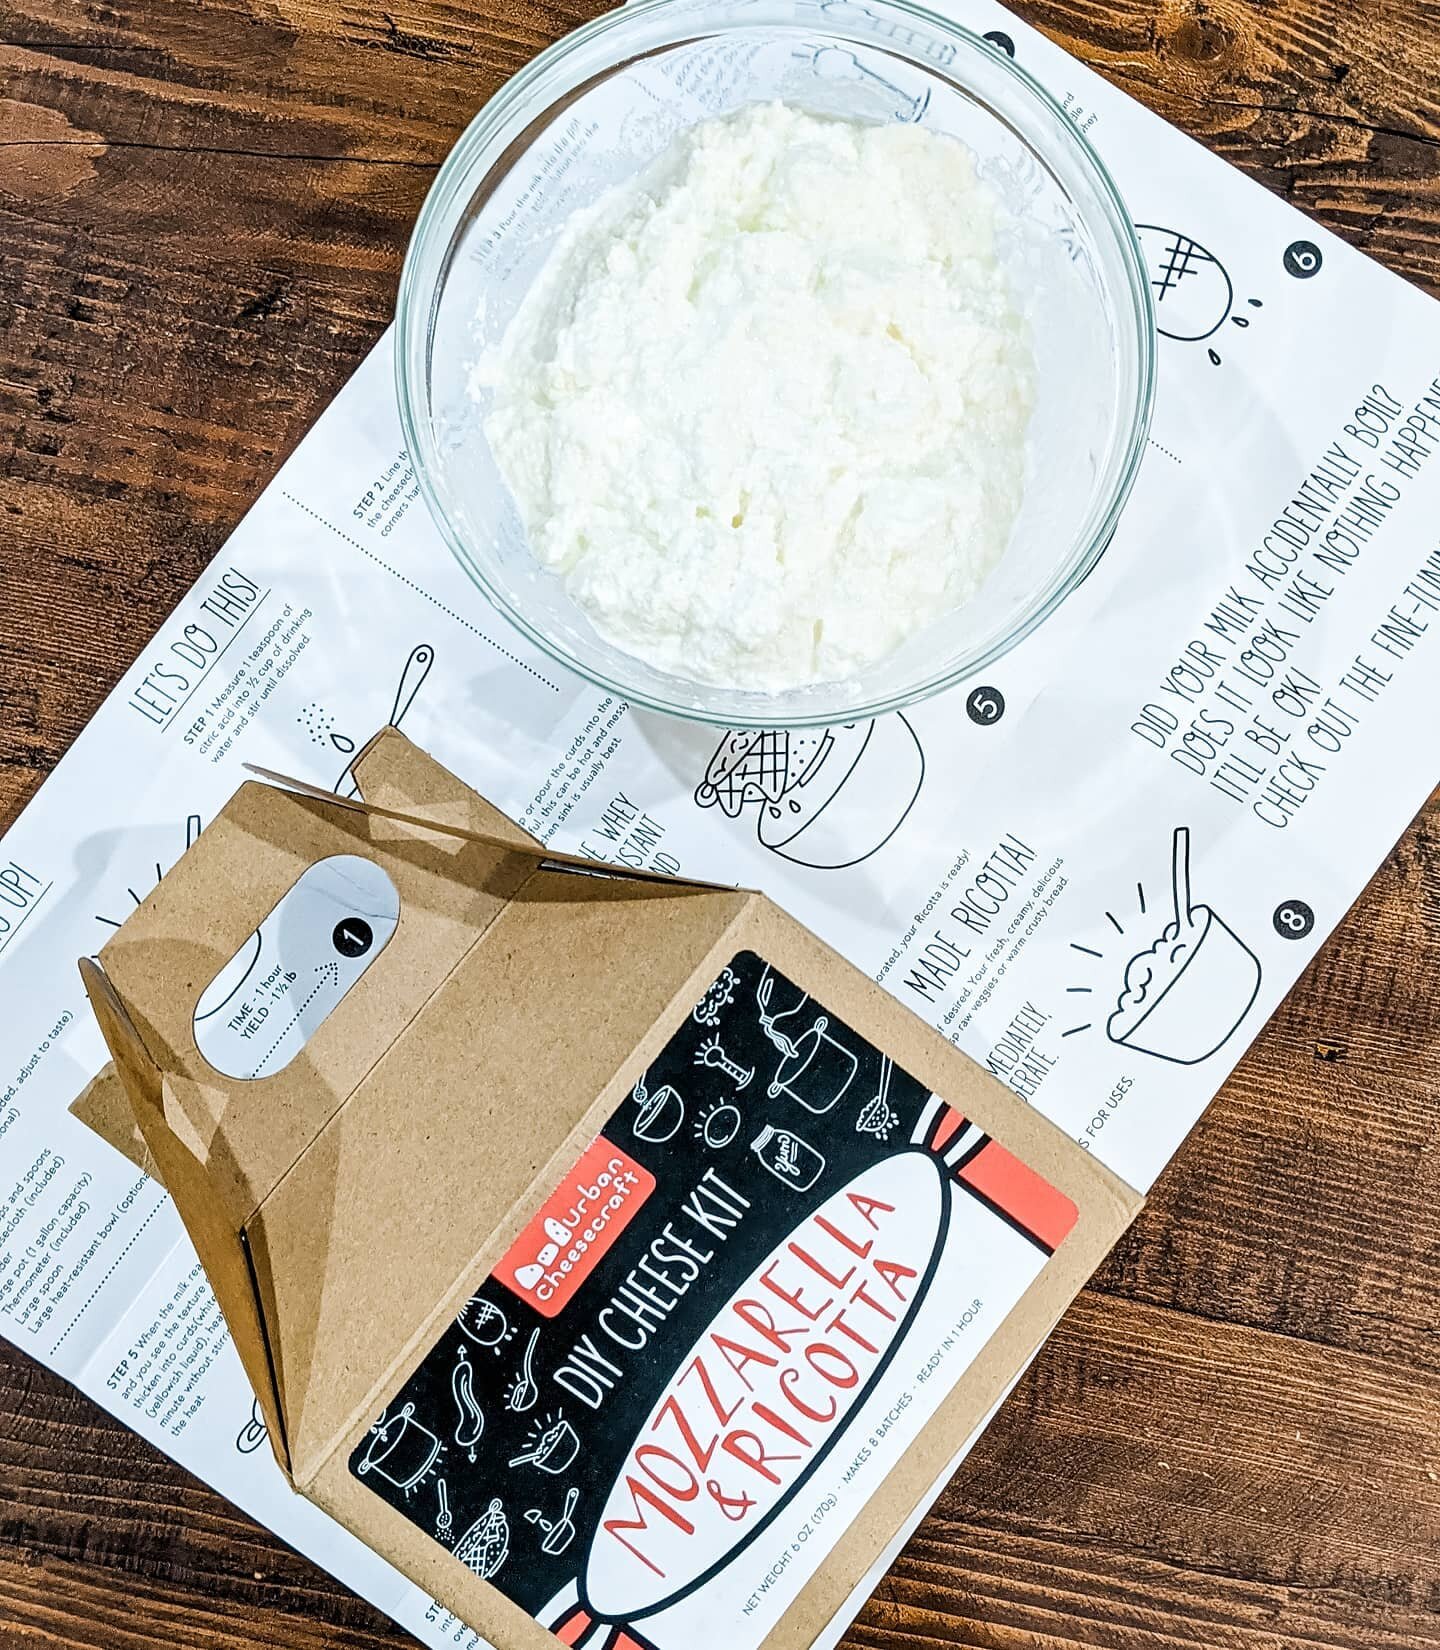 I remember Friday nights where I would just be starting to get ready to go out, drink in my hand, music up loud 😜⁣⁣
⁣⁣
Now I'm making homemade ricotta cheese in my kitchen with my hubby 🧀 Things sure are different, but I love this little life 💕⁣⁣
